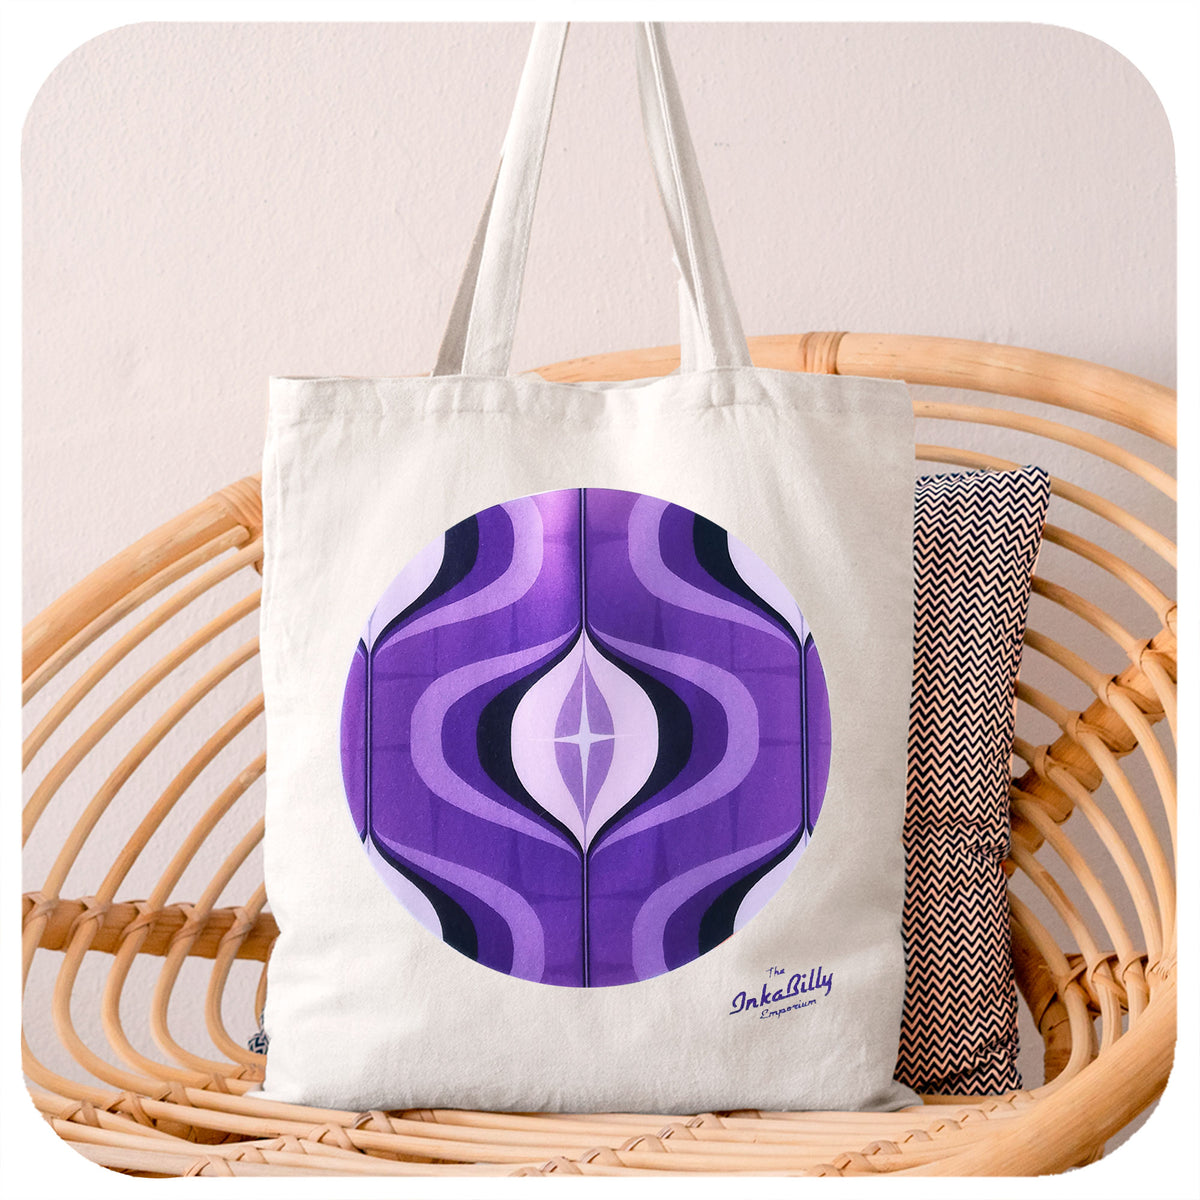 A white tote bag with a purple 70s style graphic, sits on a rattan chair | The Inkabilly Emporium